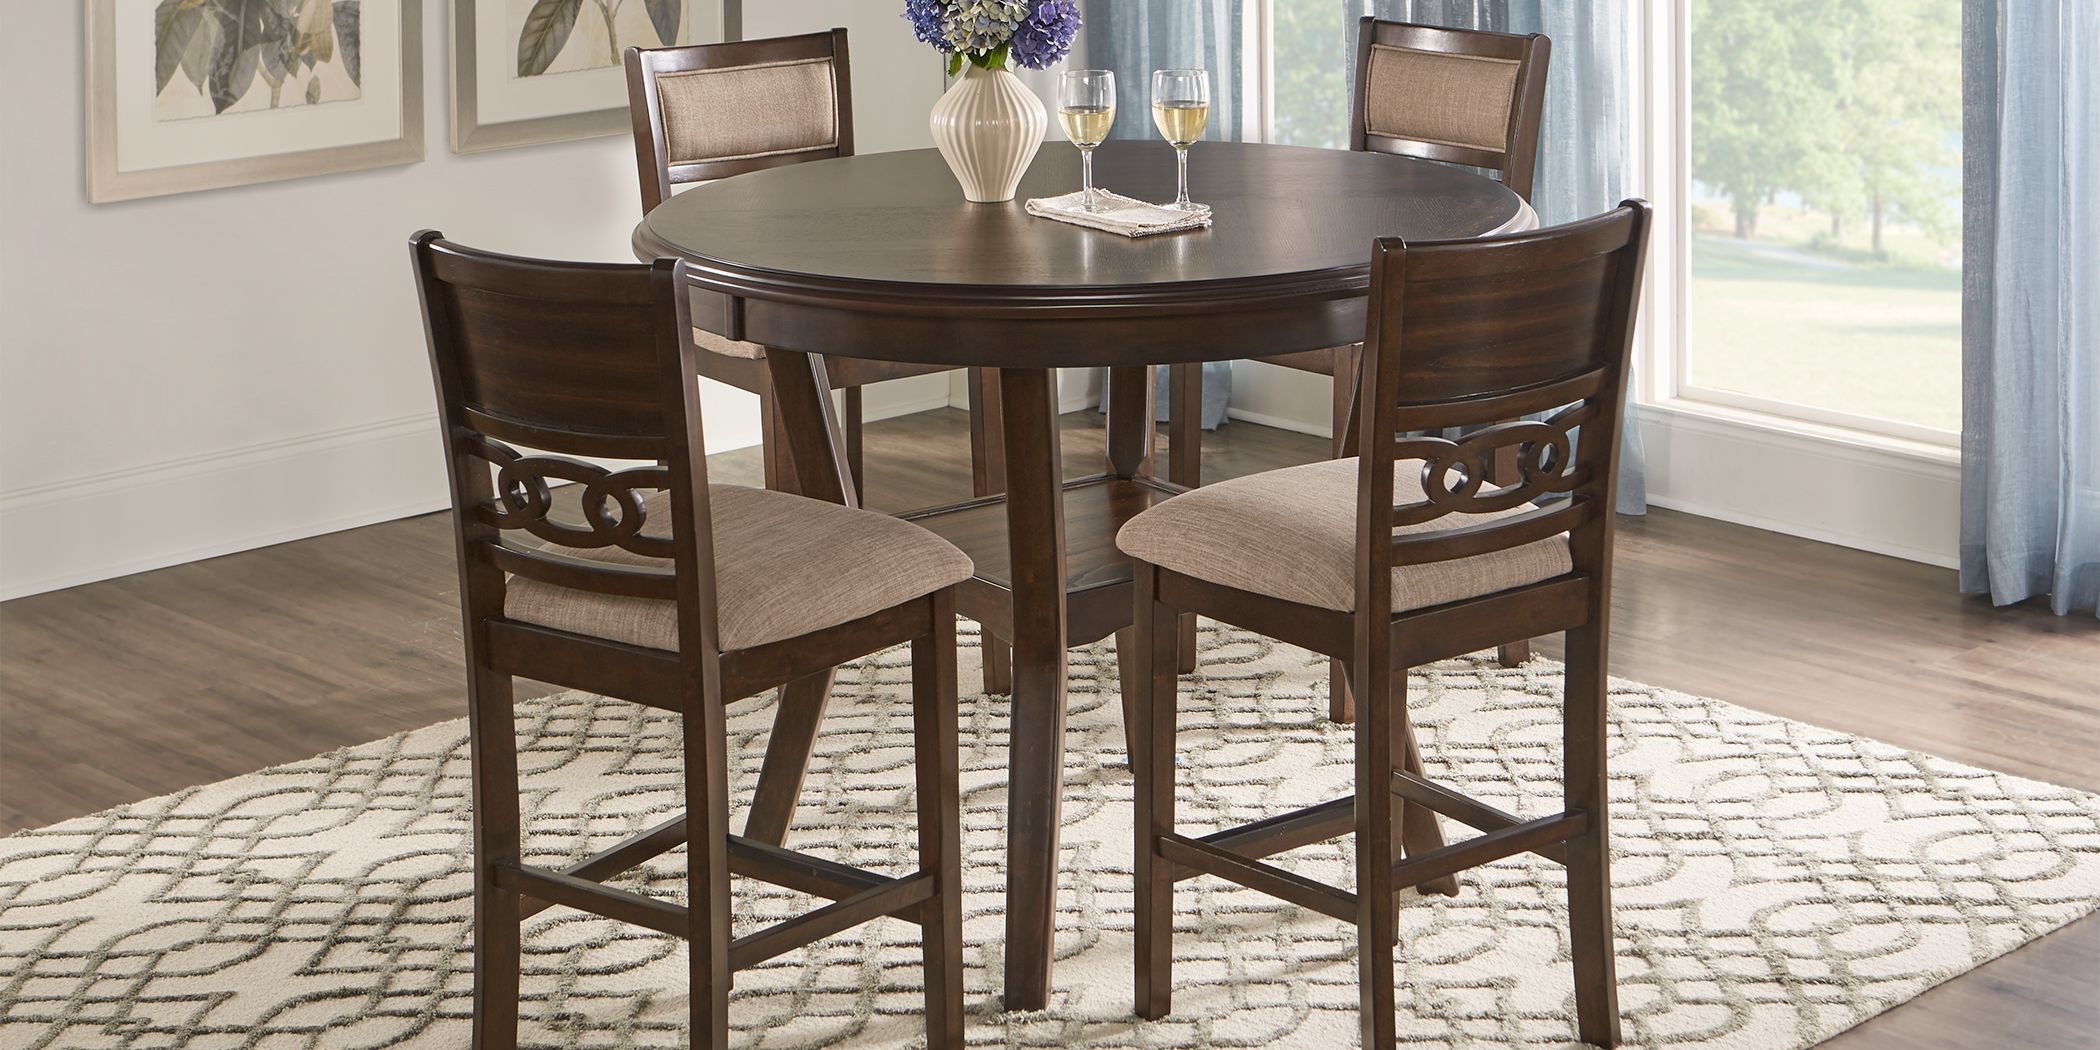 Rooms To Go Dining Room Furniture, Rooms To Go Dining Room Sets